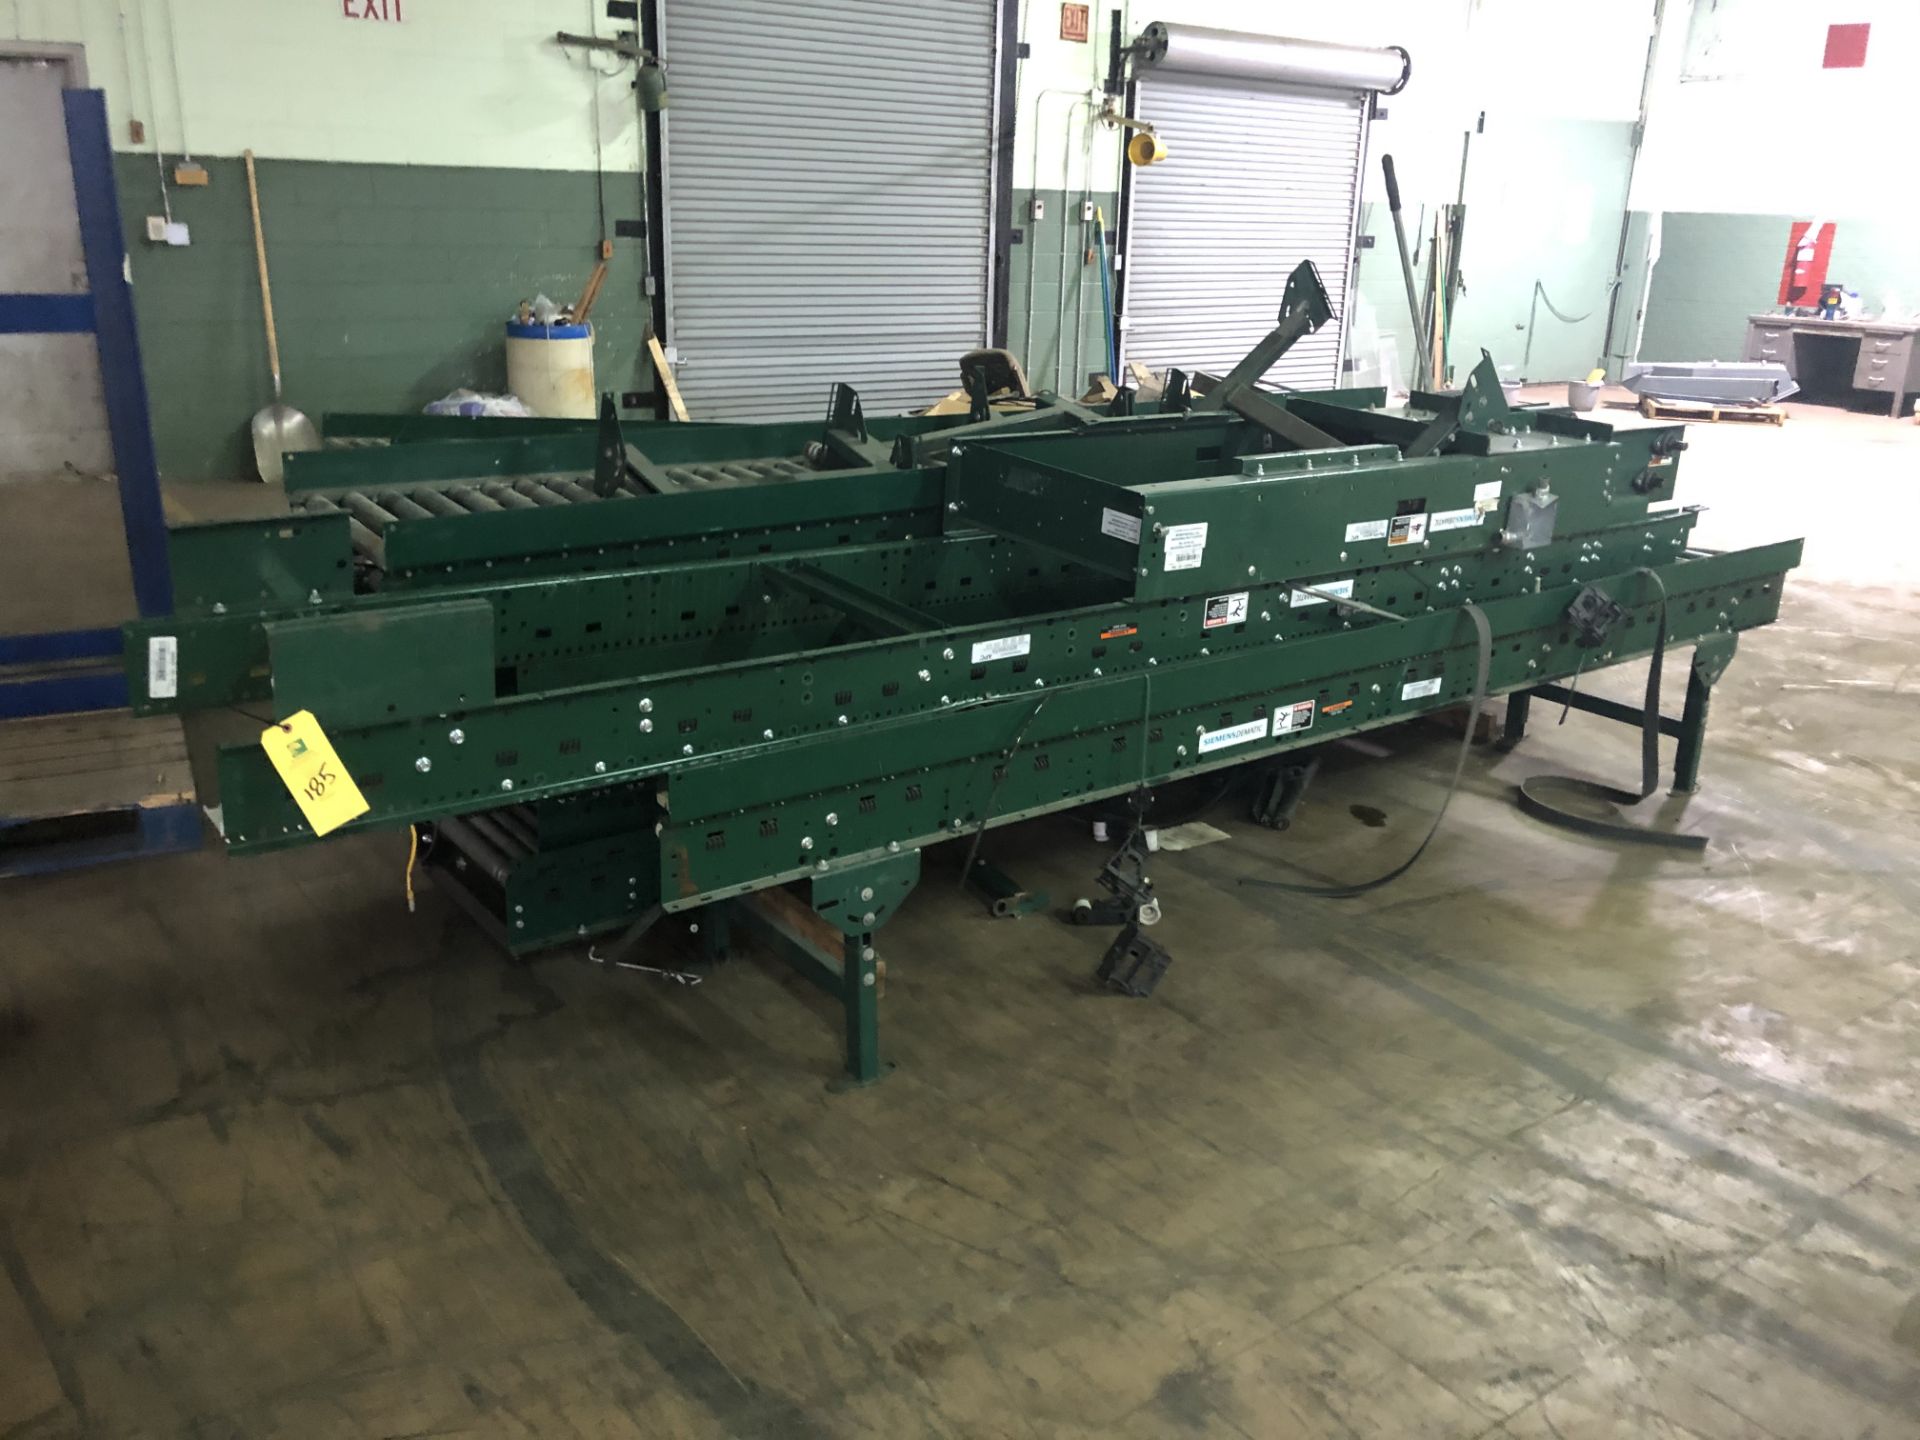 Siemens Dematic Motorized Roller Conveyor, Approximate (7) 10' Sections, RIGGING FEE - $800